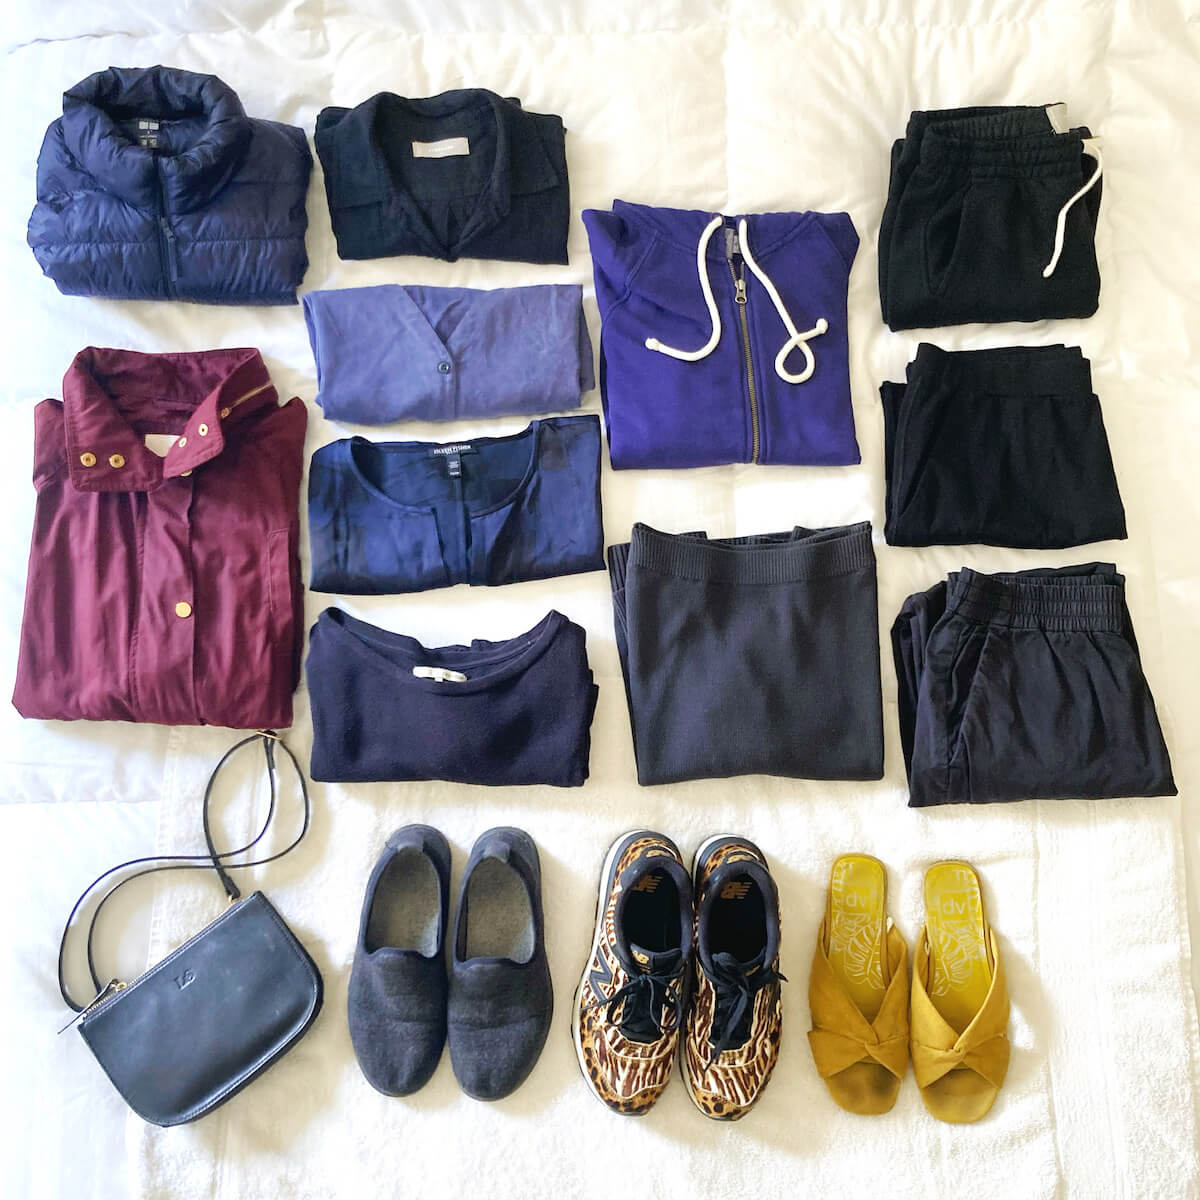 11 pieces of clothing, folded neatly, plus 3 pairs of shoes and a bag, all on a white surface